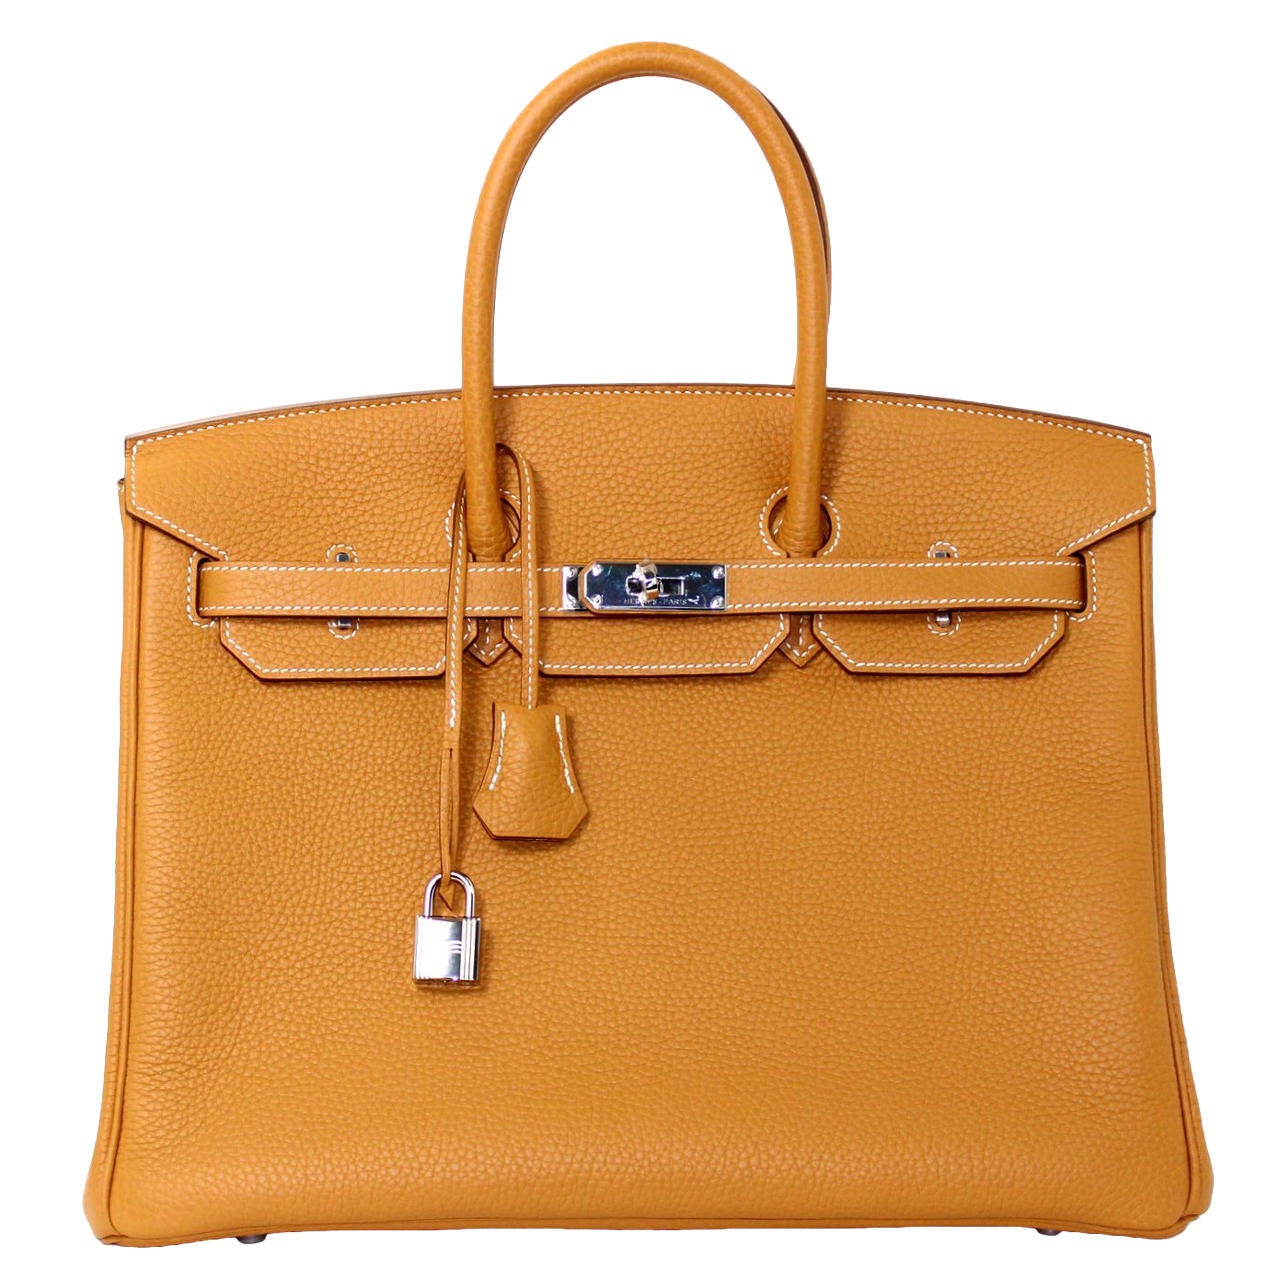 Hermes Fjord Leather Birkin Bag- 35 cm in Sable Brown with PHW For Sale